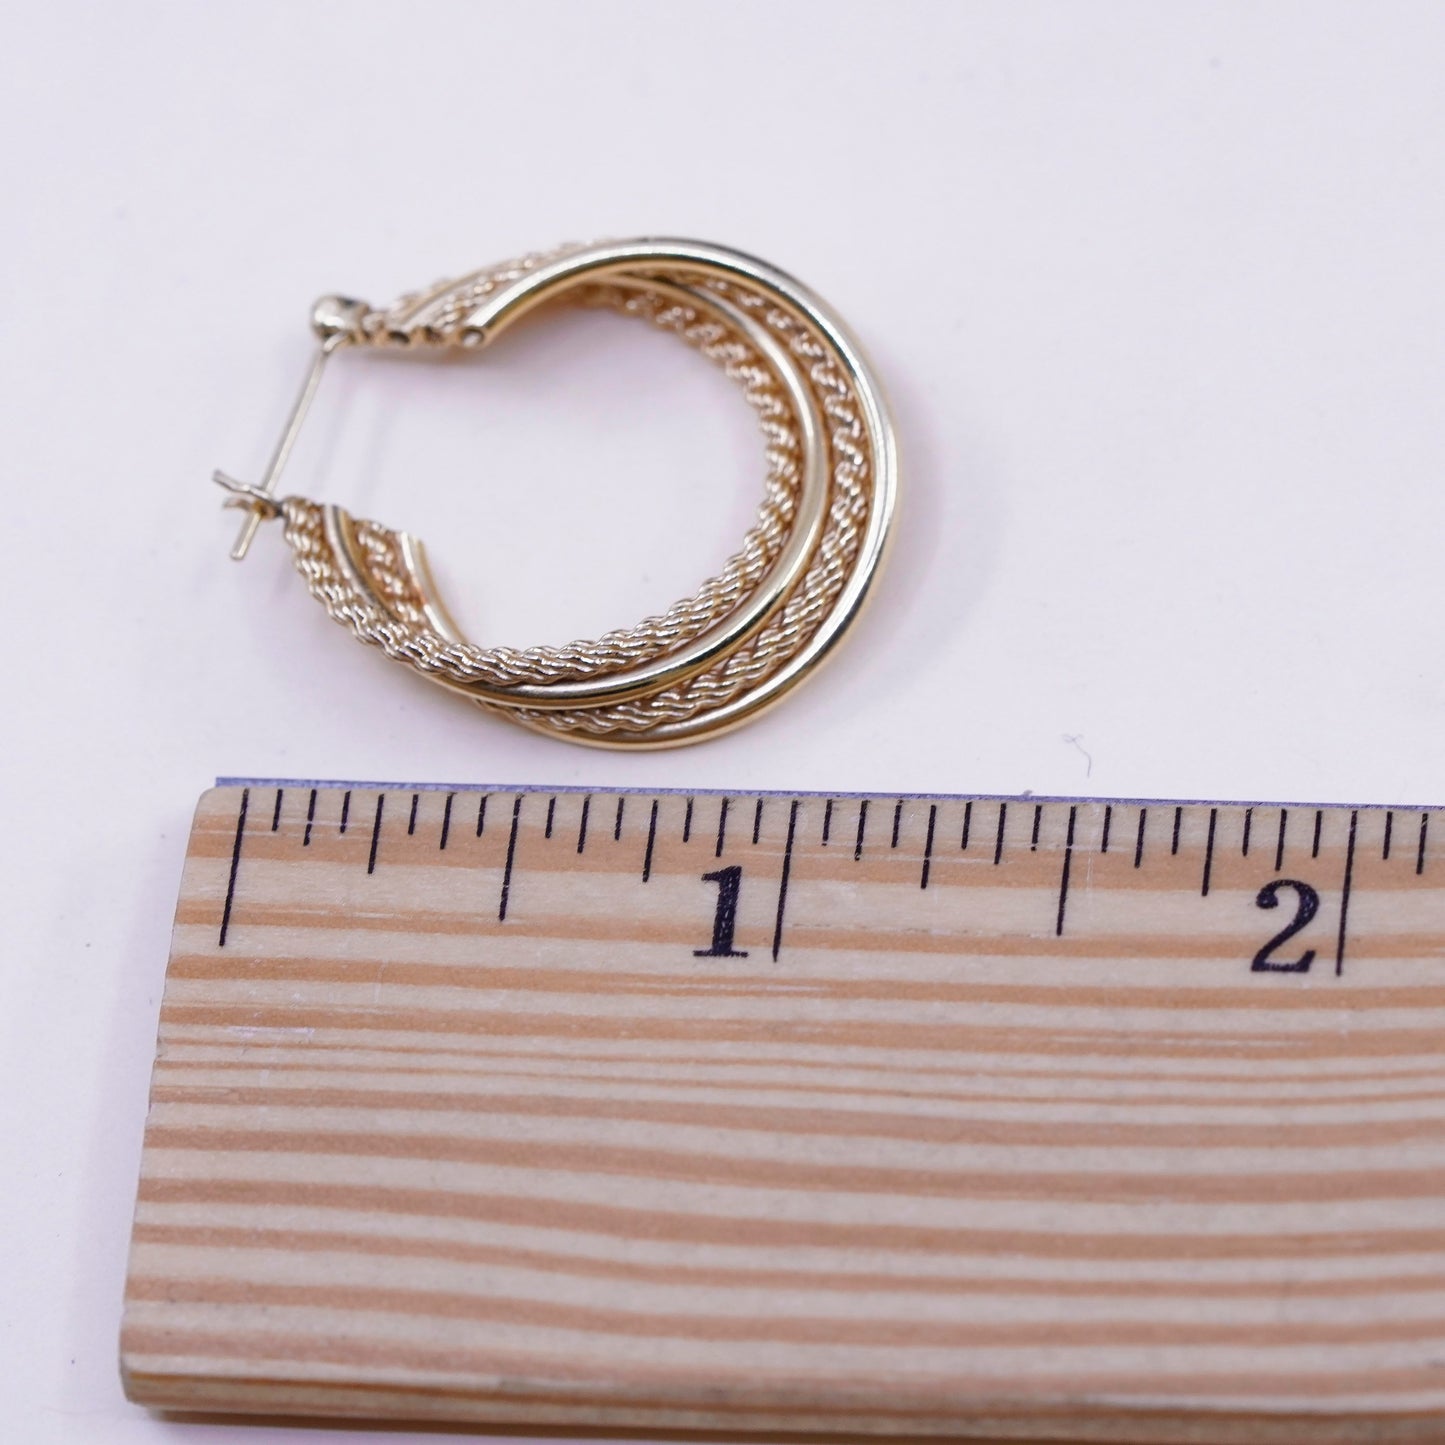 1.25”, 5.2g, Vintage real 14K gold hoops earrings, yellow gold entwined huggie